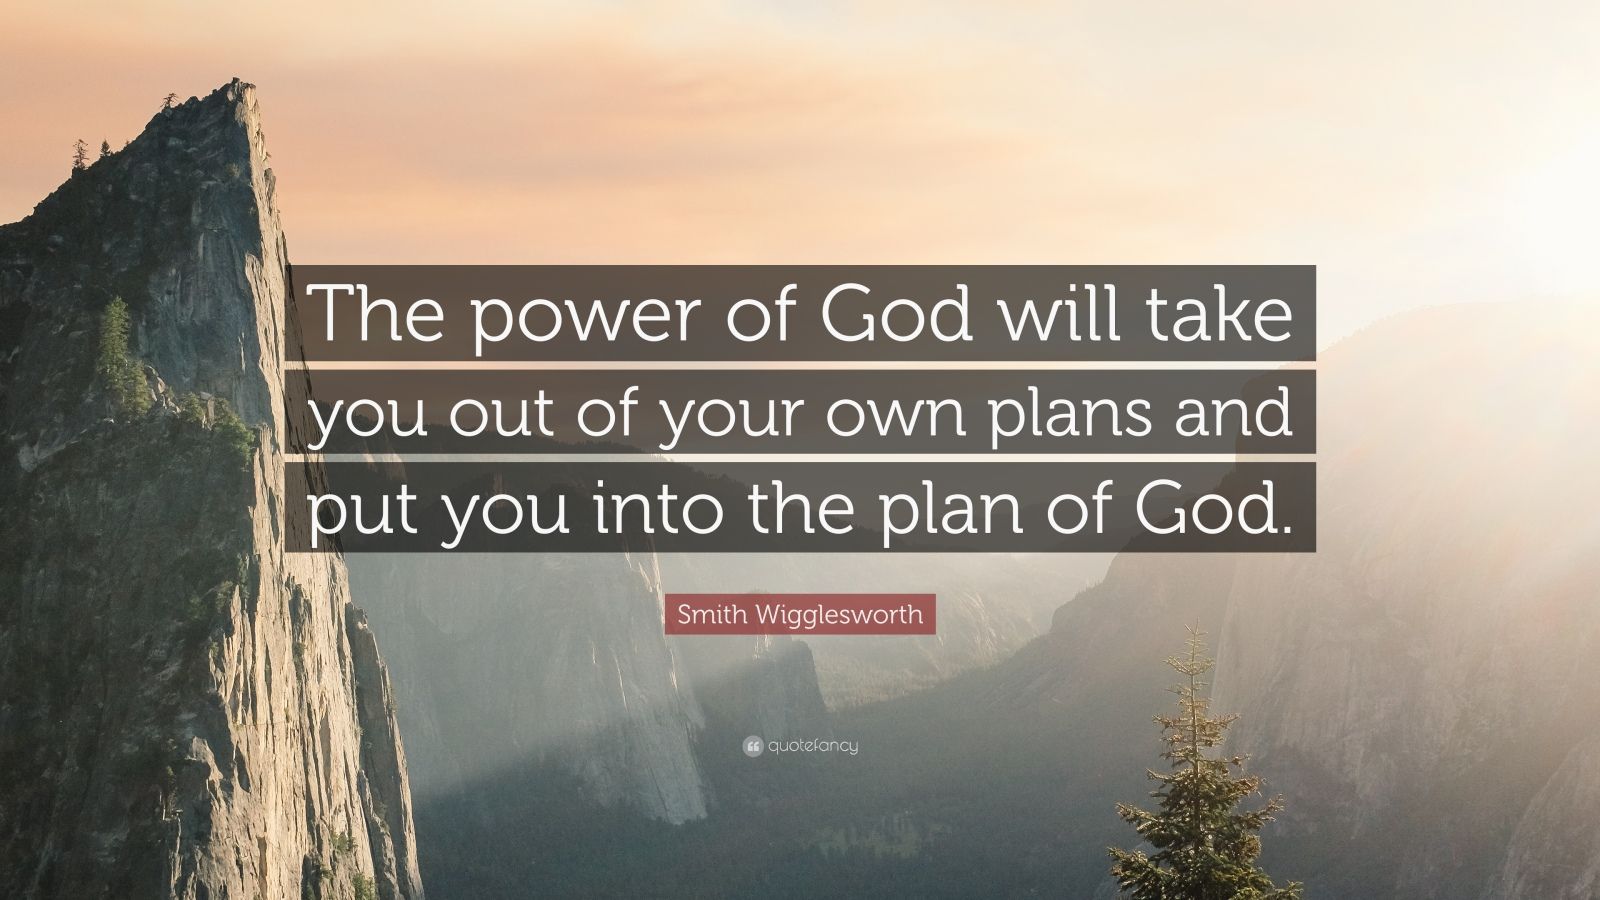 323167 Smith Wigglesworth Quote The power of God will take you out of